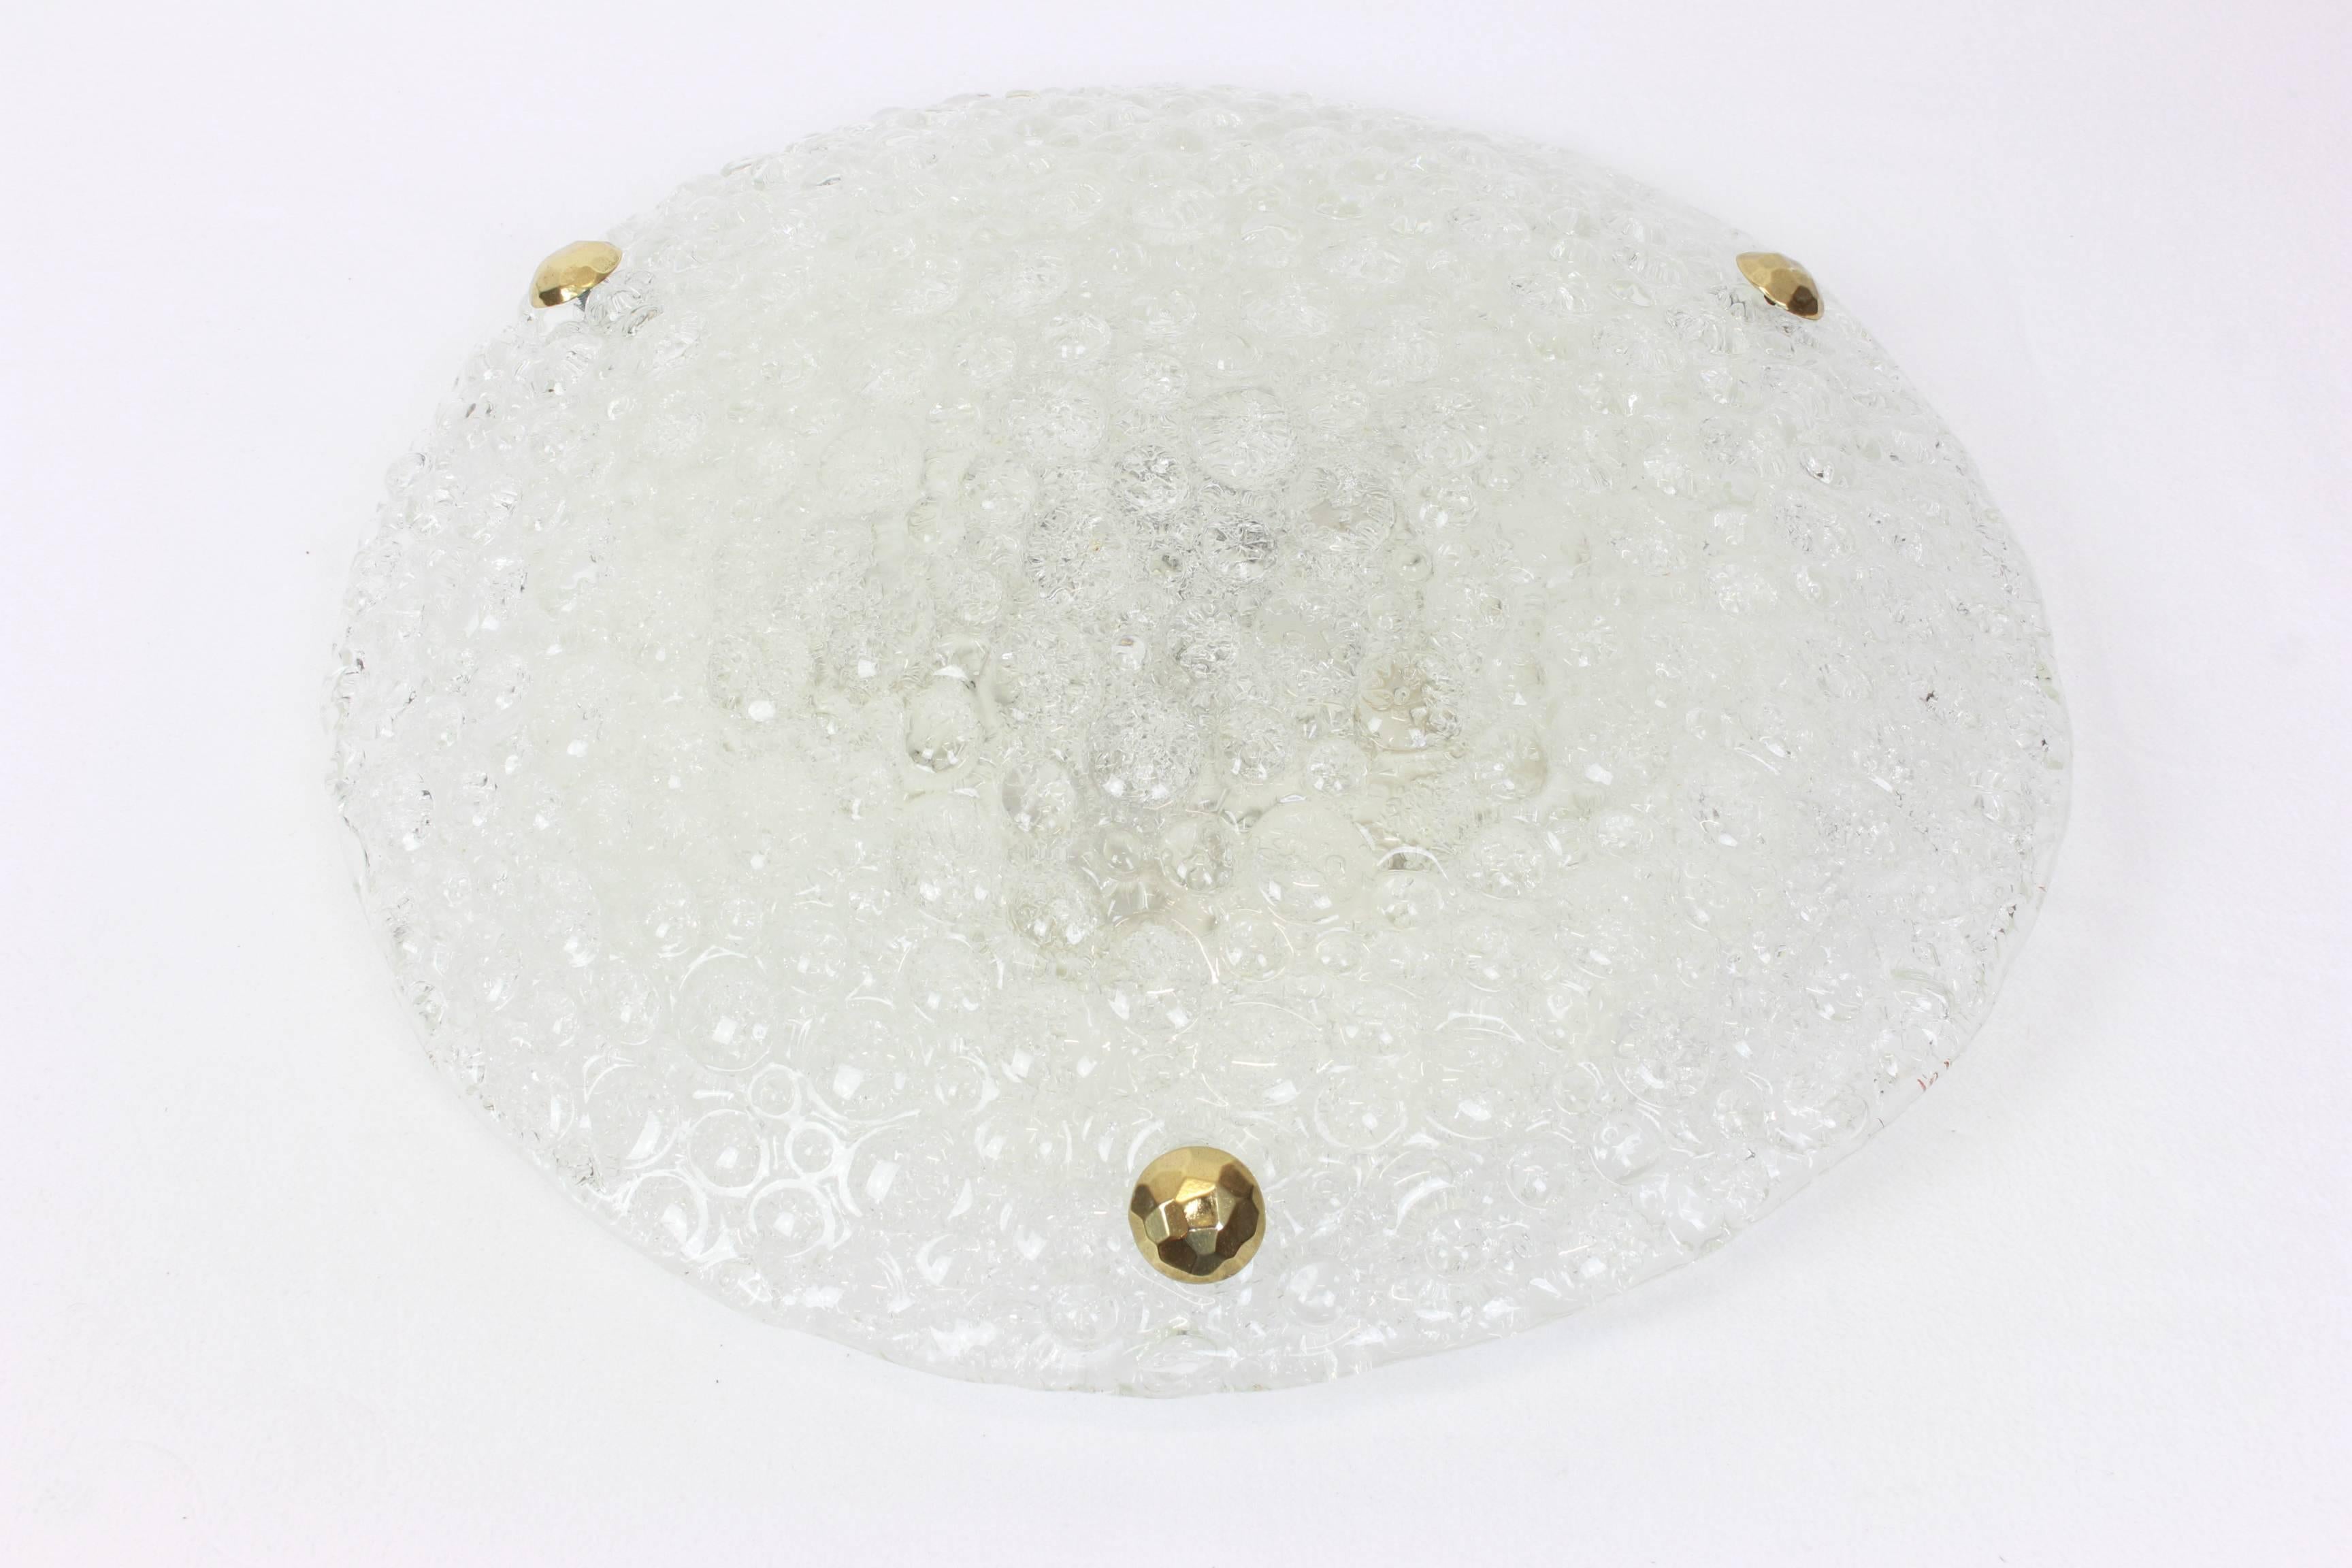 A wonderful round ice glass flushmount by Hillebrand Leuchten, Germany, 1970s.
Thick textured Murano ice glass fixture on a white metal base with three brass screws.

High quality and in very good condition. Cleaned, well-wired and ready to use.